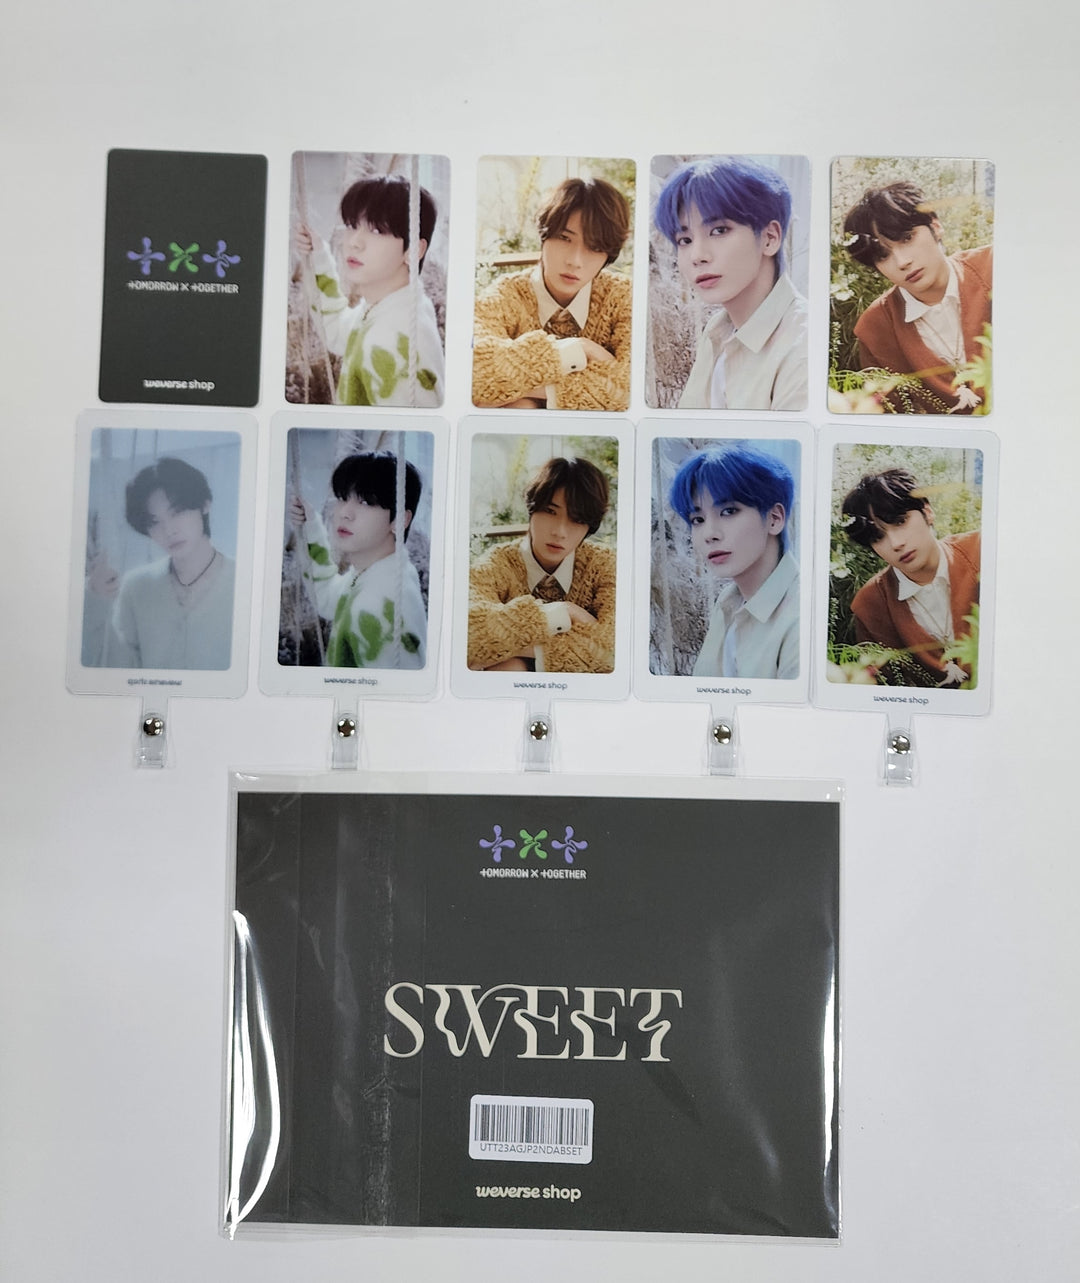 TXT JP 2nd Album "SWEET" - Weverse Shop Pre-Order Benefit Photocards & phone tab, Mini Poster [Limited A,B + Standard]